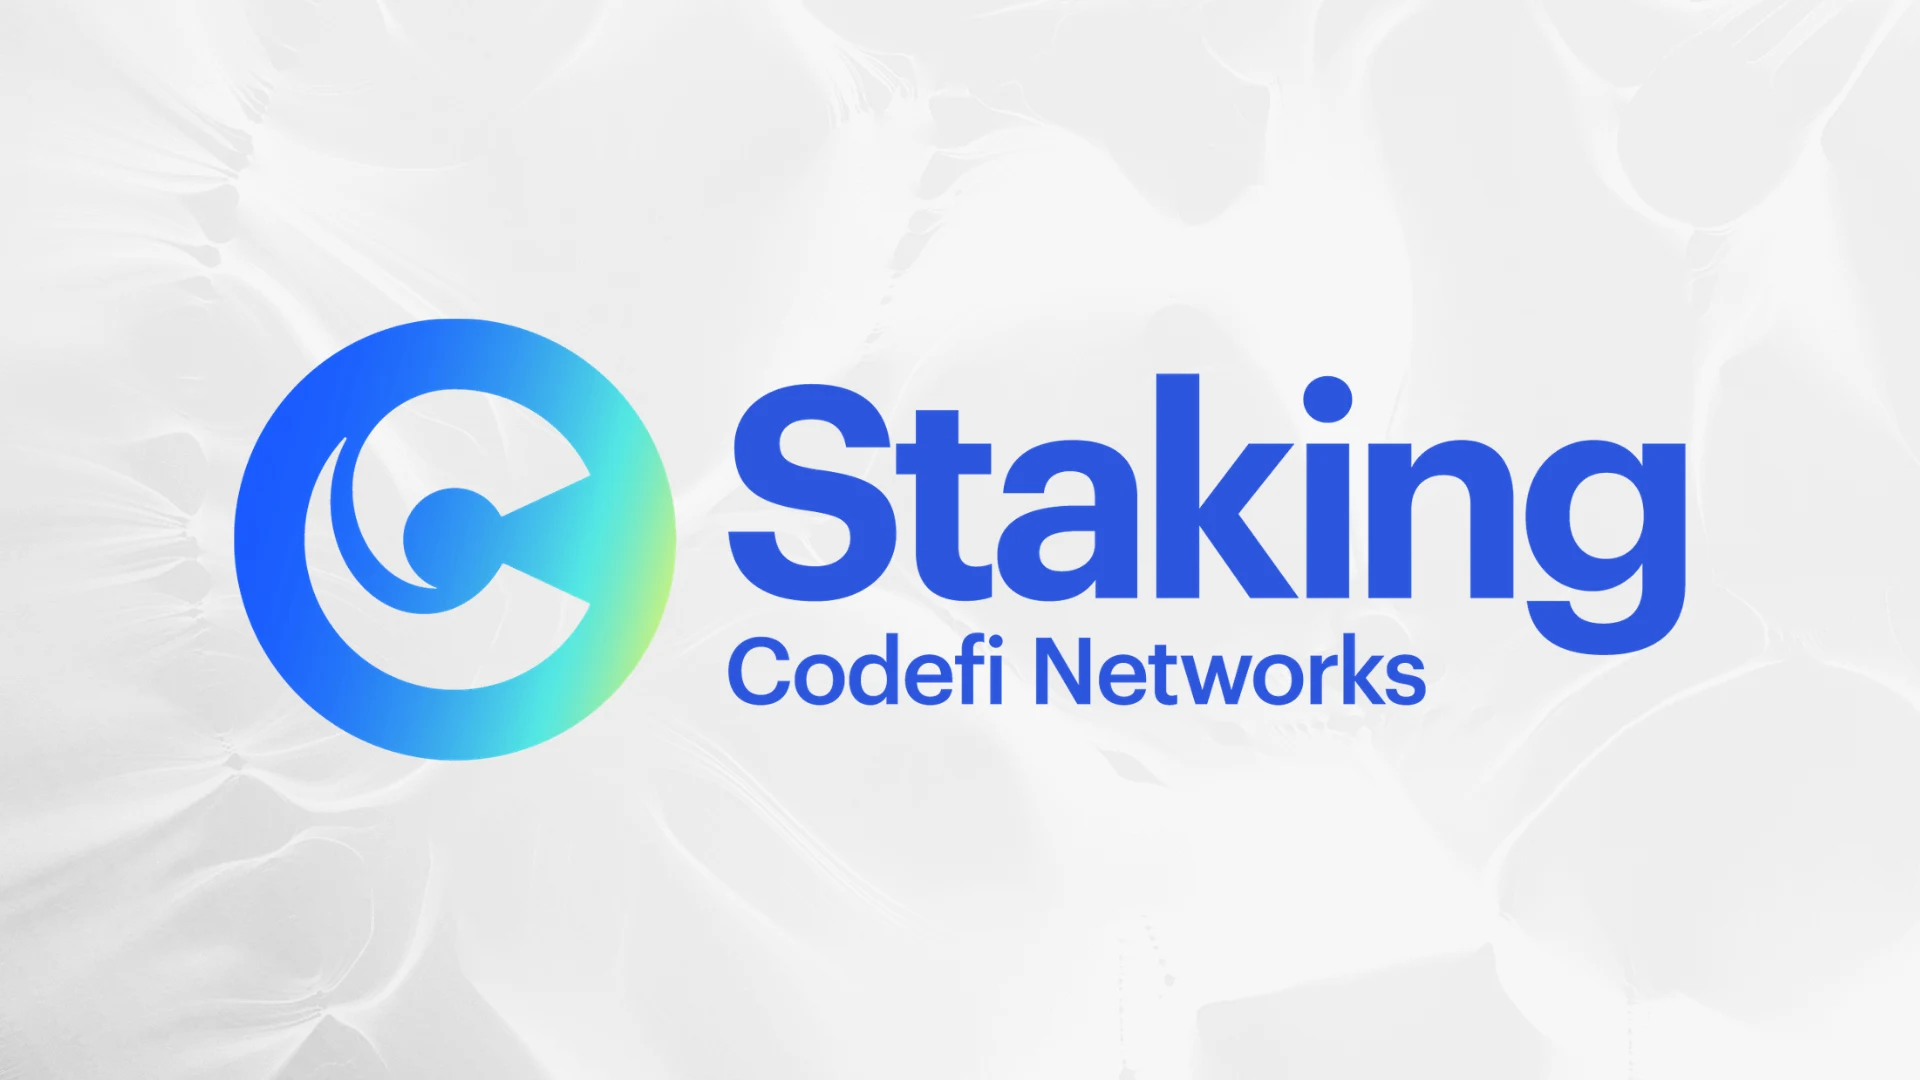 Image: ConsenSys Codefi Announces Ethereum 2.0 Staking Pilot with 6 Members